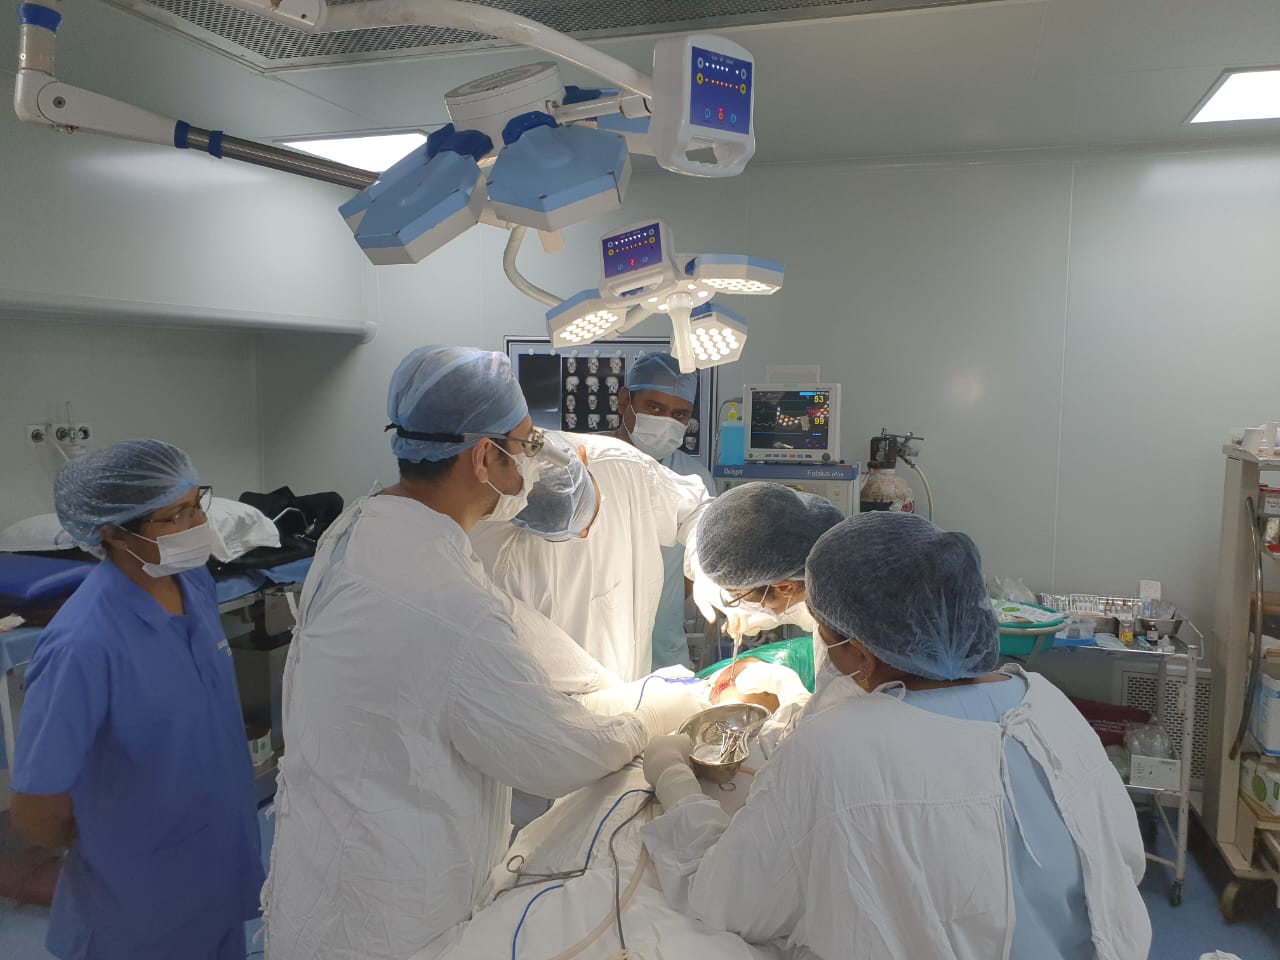 Challenging Mandibular Surgery Successfully Completed at Pune Divisional Railway Hospital